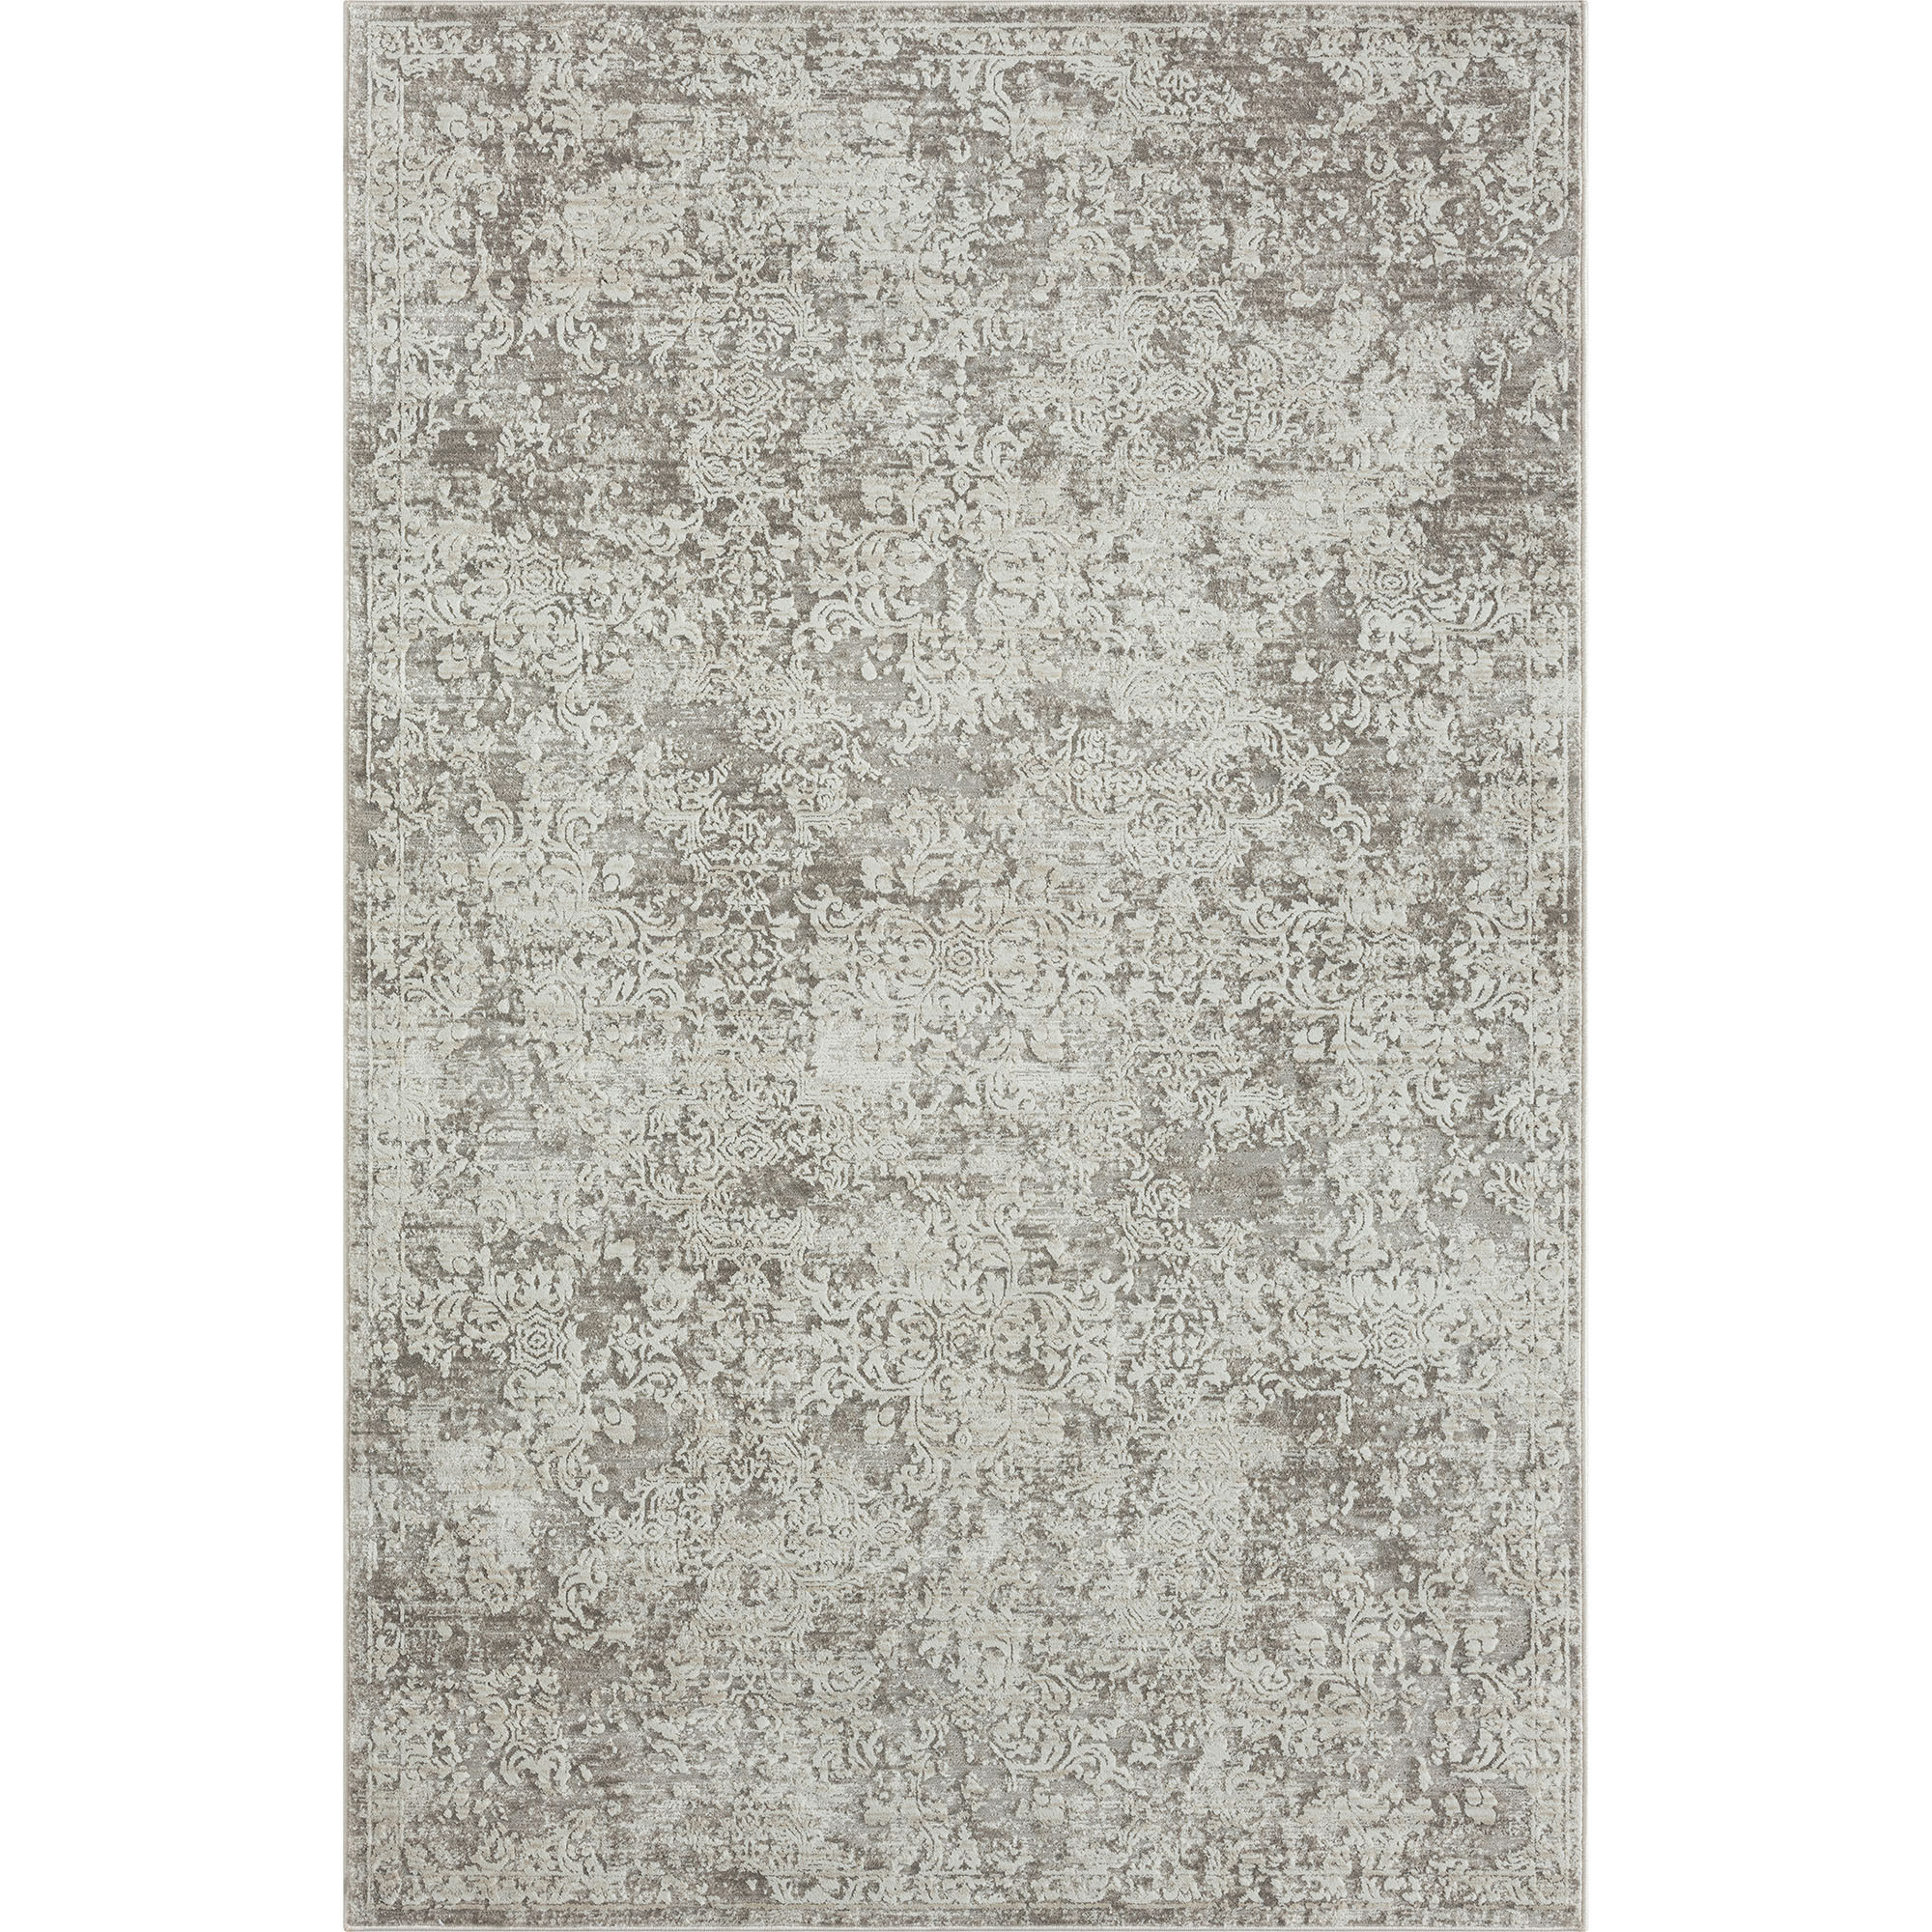 2' X 3' Gray Abstract Distressed Area Rug-516059-1